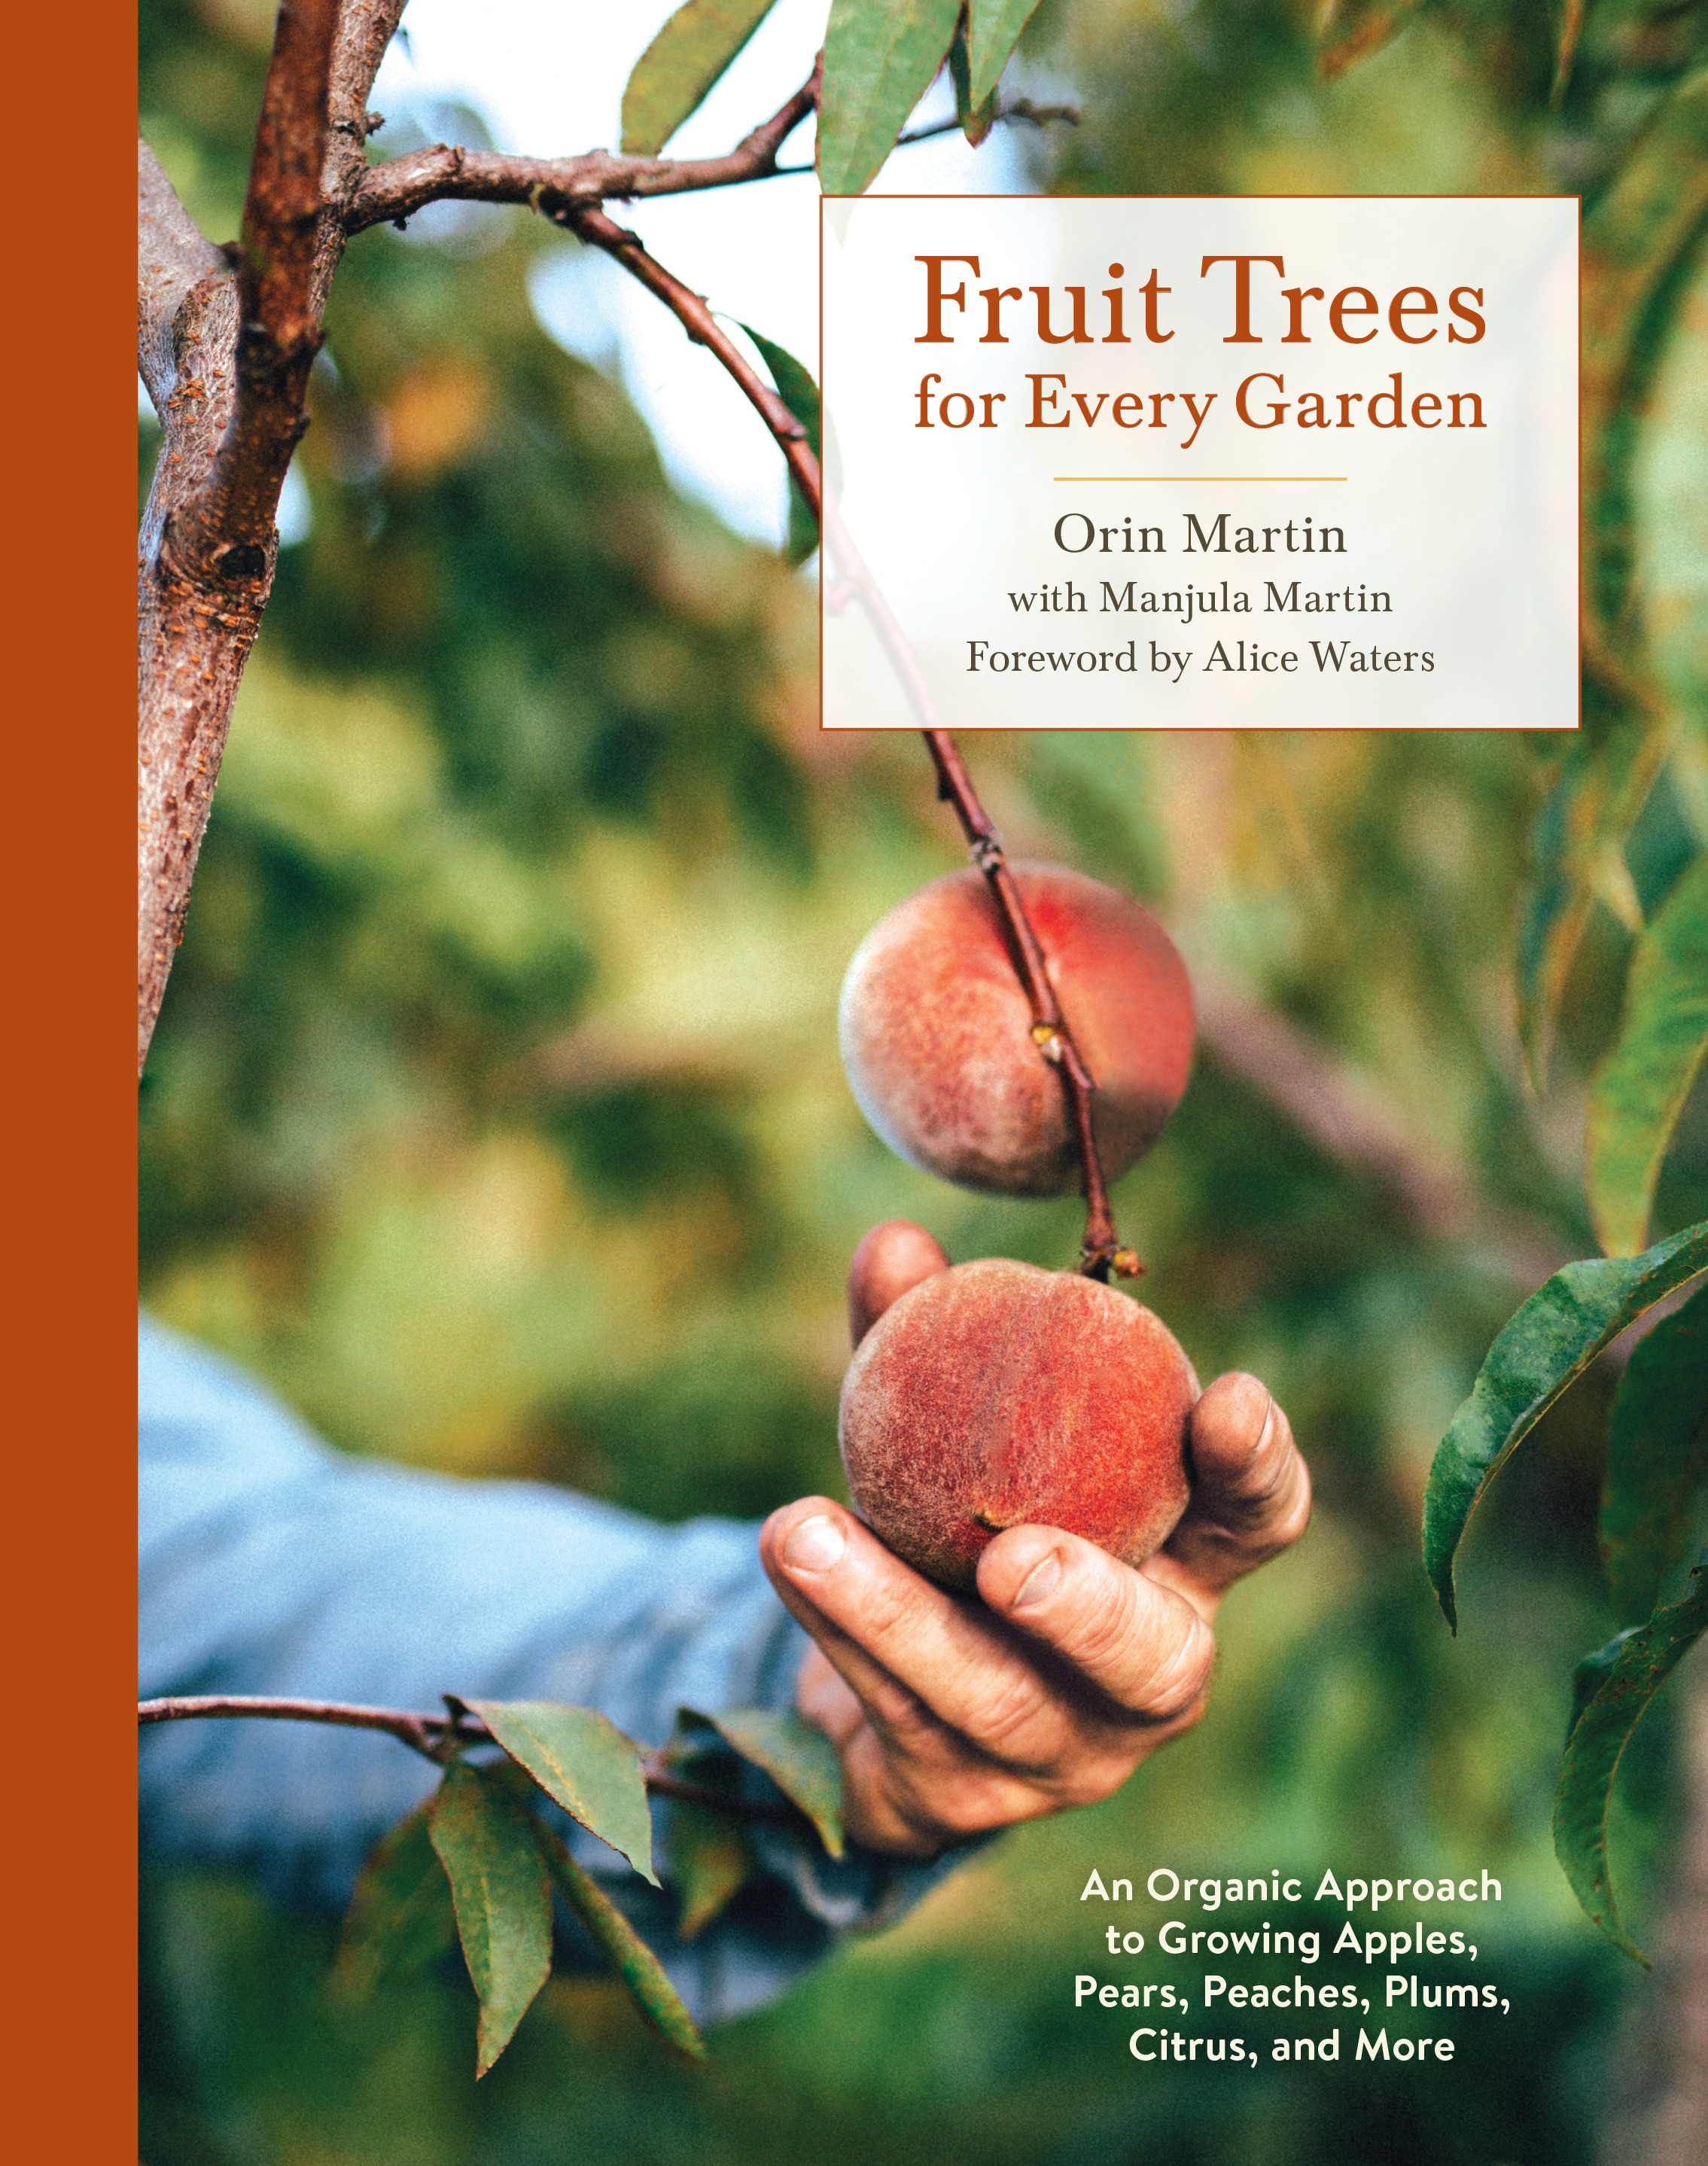 How to plant fruit trees in california